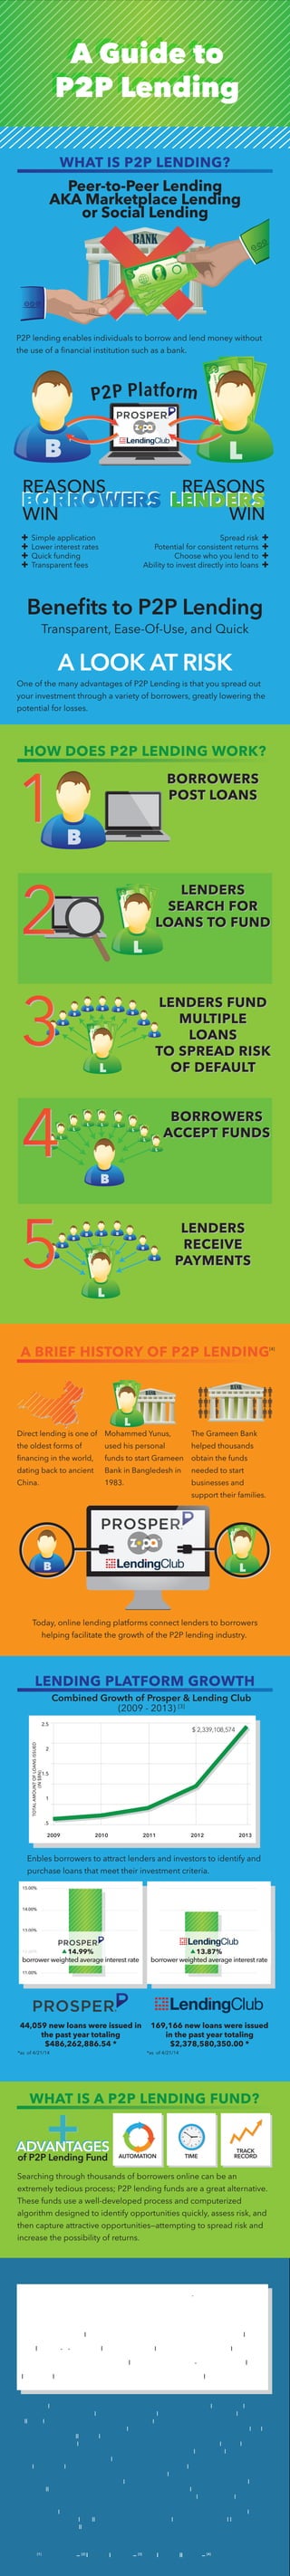 AUTOMATION TIME
TRACK
RECORD
ADVANTAGESADVANTAGES
of P2P Lending Fund
WHAT IS A P2P LENDING FUND?
Searching through thousands of borrowers online can be an
extremely tedious process; P2P lending funds are a great alternative.
These funds use a well-developed process and computerized
algorithm designed to identify opportunities quickly, assess risk, and
then capture attractive opportunities—attempting to spread risk and
increase the possibility of returns.
A BRIEF HISTORY OF P2P LENDING
BANK
BANK
Direct lending is one of
the oldest forms of
ﬁnancing in the world,
dating back to ancient
China.
Mohammed Yunus,
used his personal
funds to start Grameen
Bank in Bangledesh in
1983.
The Grameen Bank
helped thousands
obtain the funds
needed to start
businesses and
support their families.
Today, online lending platforms connect lenders to borrowers
helping facilitate the growth of the P2P lending industry.
Enbles borrowers to attract lenders and investors to identify and
purchase loans that meet their investment criteria.
15.00%
14.00%
13.00%
12.00%
11.00%
14.99%
borrower weighted average interest rate
13.87%
borrower weighted average interest rate
*as of 4/21/14 *as of 4/21/14
44,059 new loans were issued in
the past year totaling
$486,262,886.54 *
169,166 new loans were issued
in the past year totaling
$2,378,580,350.00 *
LENDING PLATFORM GROWTH
Prime Meridian Capital Management is an investment management ﬁrm specializing
in online peer-to-peer (P2P) lending strategies. Its ﬂagship Prime Meridian Income
Fund is designed to provide investors low cost access to short-duration, high yield
loan portfolios by taking advantage of the efﬁciencies in the P2P lending market.
direct: (925) 362-8510
ddavis@pmifunds.com
www.pmifunds.com
SOURCES:
[1]
prosper.com — [2]
lendingclub.com — [3]
nickelsteamroller.com — [4]
www.ﬁnaid.org
This material is being provided for information and discussion purposes only and is qualiﬁed in its
entirety by the information included in the conﬁdential offering documents and supplements
(collectively, the “Memorandum”) of Prime Meridian Income Fund, LP (the “Fund”) described
herein, and is not intended to be, nor should it be construed or used as investment, tax or legal
advice or an offer to sell, or a solicitation of an offer to buy, an interest in the Fund, or any other
security. Any offer or solicitation of an investment in the Fund may be made only by delivery of the
Memorandum. Before making any investment in the Fund, you should thoroughly review the
Memorandum with your professional advisor(s) to determine whether an investment in a Fund is
suitable for you in light of your investment objectives and ﬁnancial situation. The Memorandum
contains important information concerning risk factors, including a more comprehensive
description of the risks and other material aspects of an investment in the Fund, and should be
read carefully before any decision to invest is made. The Fund is only open investors ﬁtting the
deﬁnition of an “accredited investor” as that term is deﬁned under Rule 501 of Regulation D of
The Securities Act of 1933. This presentation may not be distributed without the consent of Prime
Meridian Capital Management, LLC. The past performance is not indicative of future results. An
investment in the Fund, like all investments, contains risk including the risk of total loss, and may
not be appropriate for all investors.
HOW DOES P2P LENDING WORK?
BORROWERS
POST LOANS
LENDERS
SEARCH FOR
LOANS TO FUND
LENDERS FUND
MULTIPLE
LOANS
TO SPREAD RISK
OF DEFAULT
BORROWERS
ACCEPT FUNDS
LENDERS
RECEIVE
PAYMENTS
BORROWERS
POST LOANS
LENDERS
SEARCH FOR
LOANS TO FUND
LENDERS FUND
MULTIPLE
LOANS
TO SPREAD RISK
OF DEFAULT
BORROWERS
ACCEPT FUNDS
LENDERS
RECEIVE
PAYMENTS
WHAT IS P2P LENDING?
P2P lending enables individuals to borrow and lend money without
the use of a ﬁnancial institution such as a bank.
One of the many advantages of P2P Lending is that you spread out
your investment through a variety of borrowers, greatly lowering the
potential for losses.
A Guide to
P2P Lending
A Guide to
P2P Lending
REASONS
WIN
REASONS
WIN
Spread risk +
Potential for consistent returns +
Choose who you lend to +
Ability to invest directly into loans +
+ Simple application
+ Lower interest rates
+ Quick funding
+ Transparent fees
Beneﬁts to P2P Lending
Transparent, Ease-Of-Use, and Quick
BANK
A LOOK AT RISKA LOOK AT RISK
Peer-to-Peer Lending
AKA Marketplace Lending
or Social Lending
Combined Growth of Prosper & Lending Club
(2009 - 2013) [3]
2.5
2
1.5
1
.5
TOTALAMOUNTOFLOANSISSUED
(IN$BN)
2009 2010 2011 2012 2013
[4]
$ 2,339,108,574
 